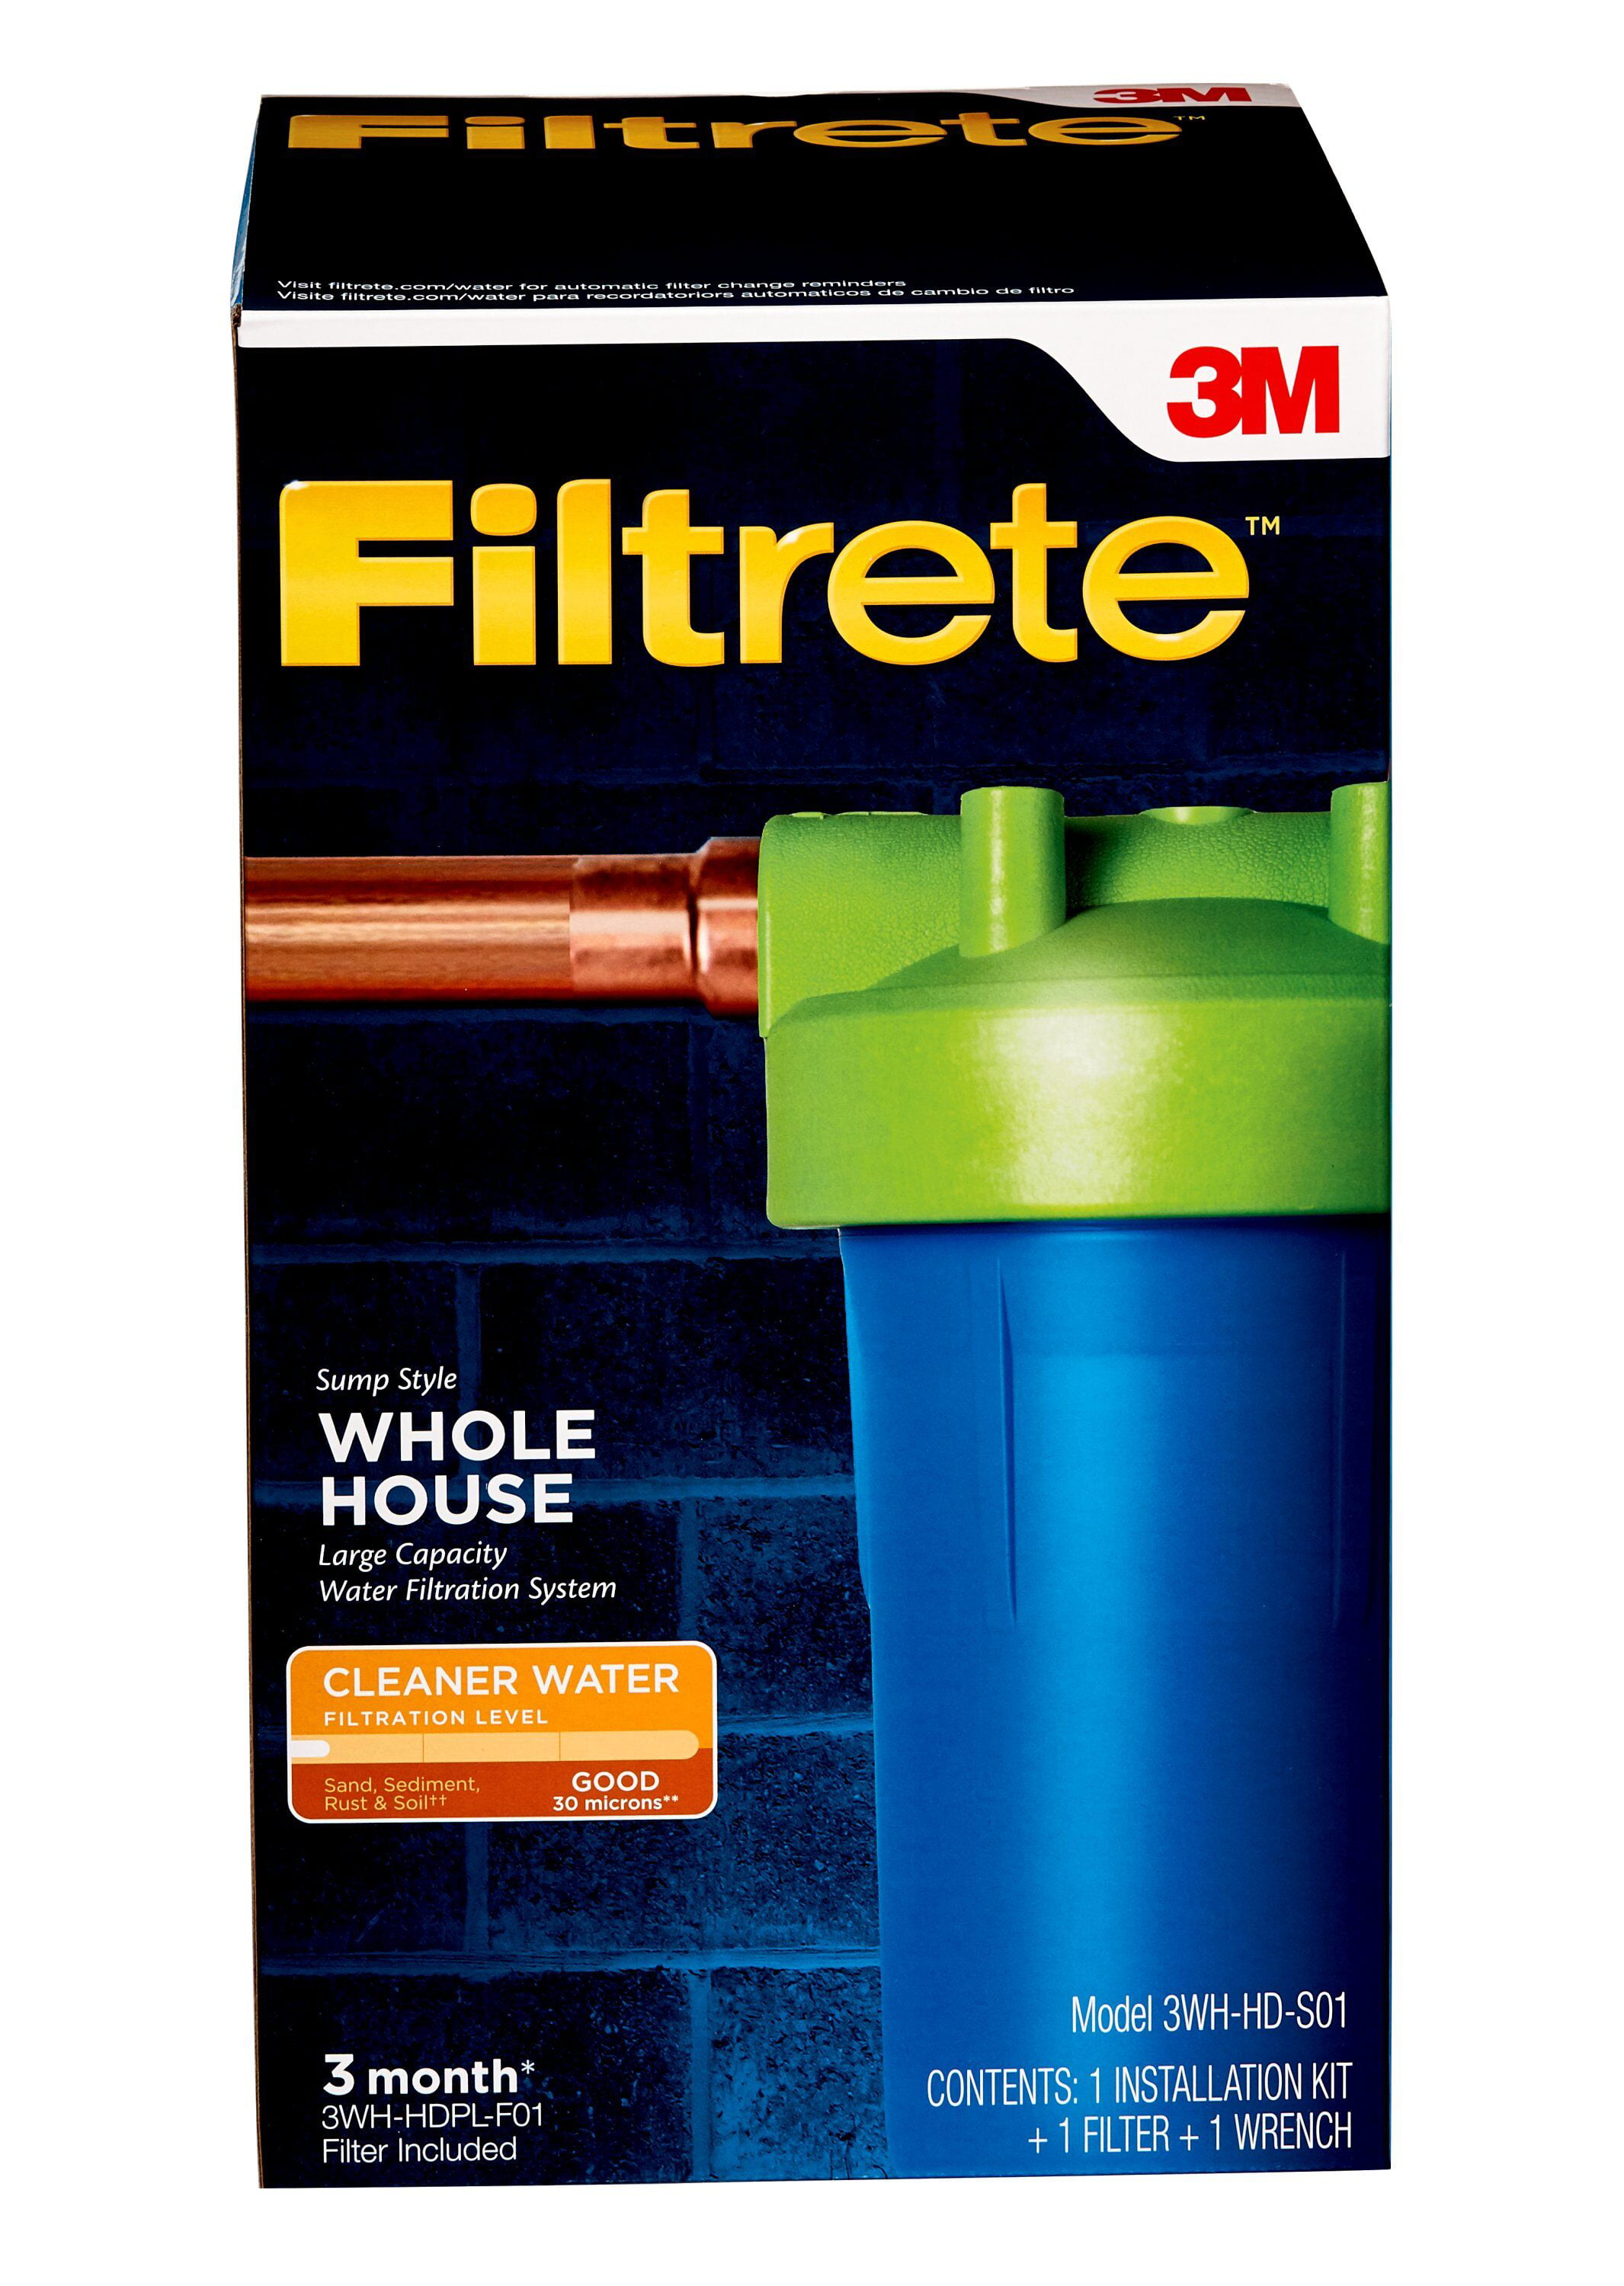 3M Filtrete Whole House Basic Water Filter System 3WH-HD-S01 Large Capacity